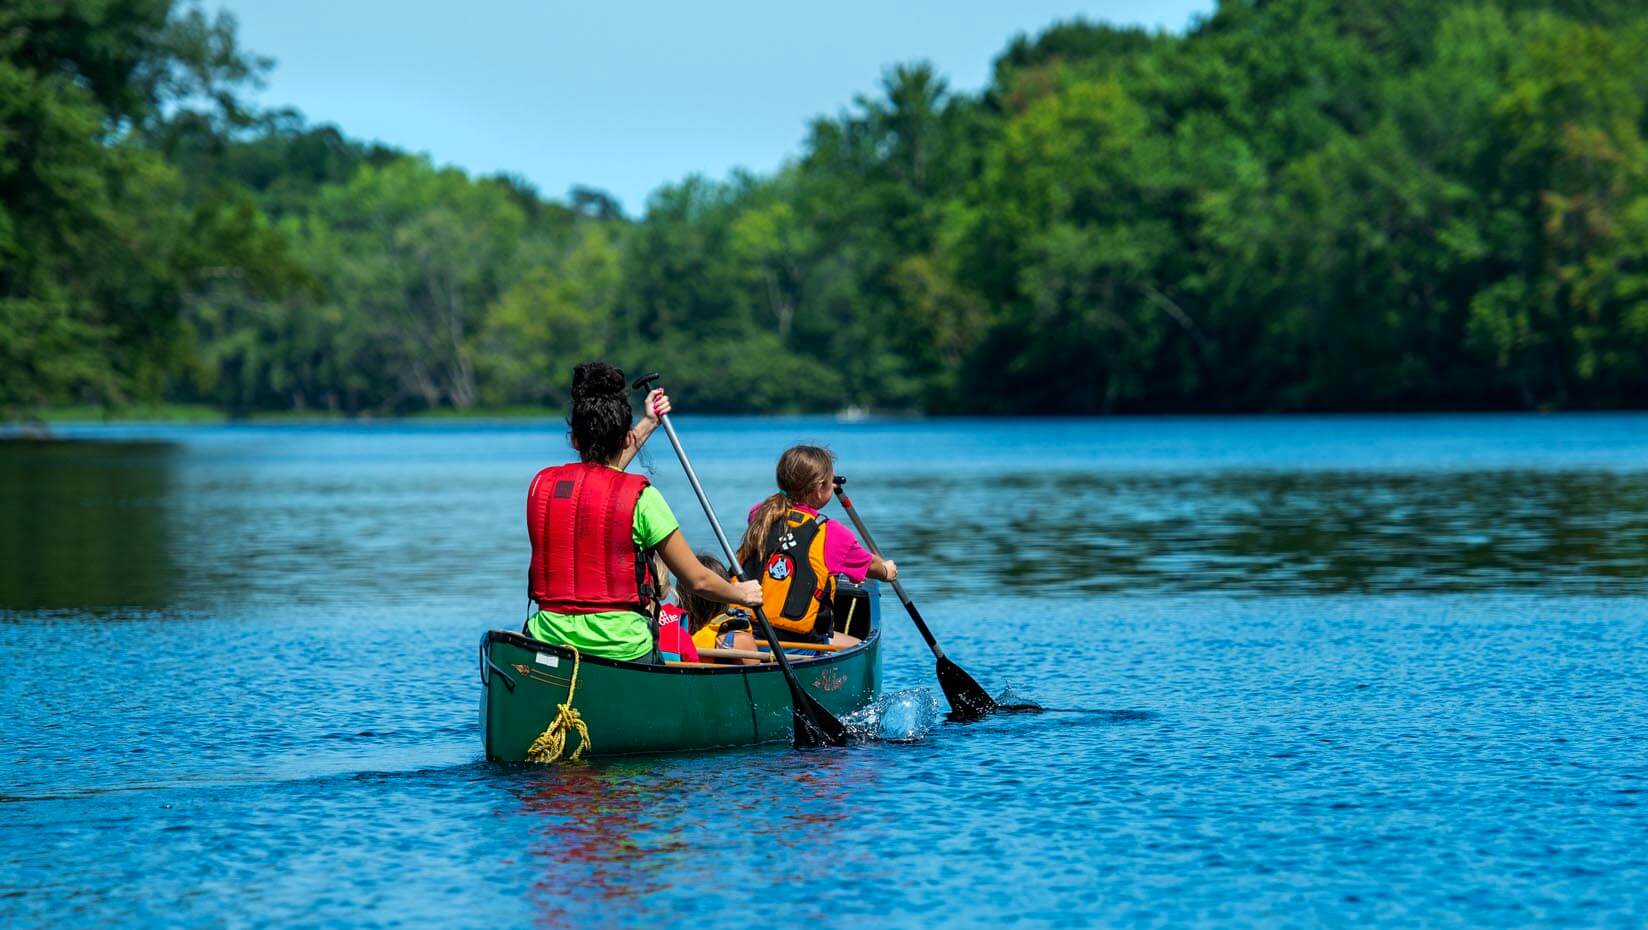 A photo of two people in a canoe on a river